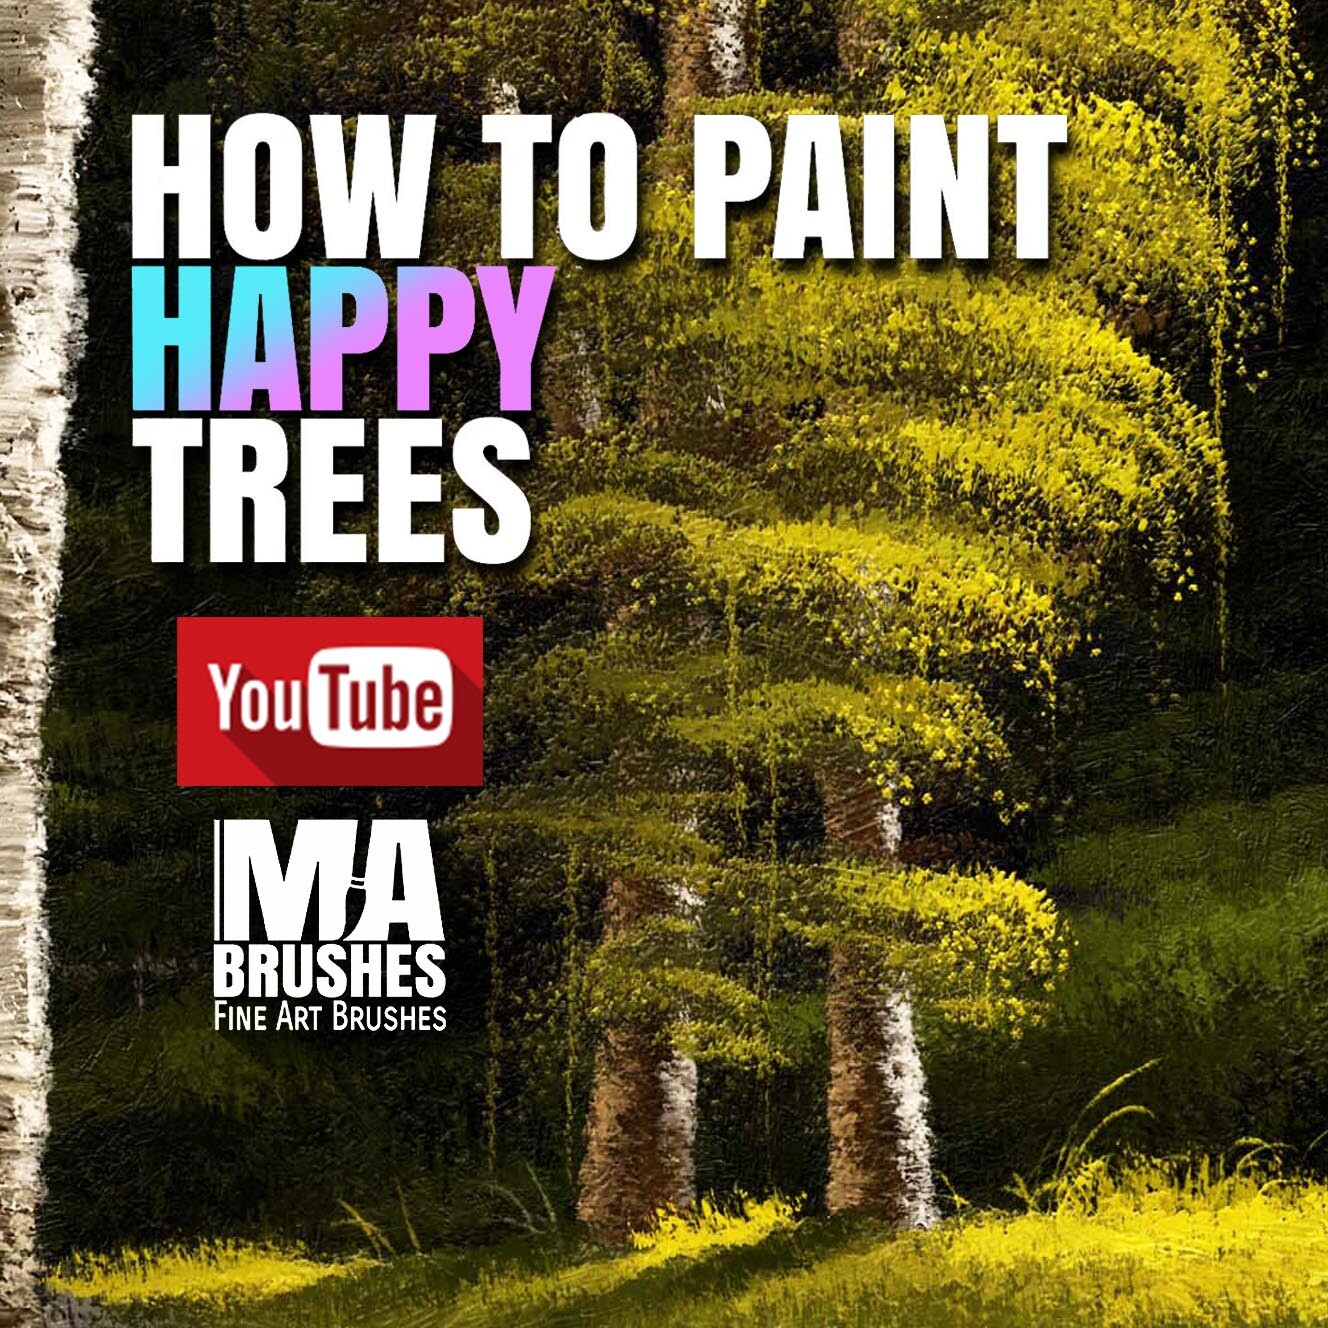 How to paint Trees - Painting Video Tutorial/Lesson